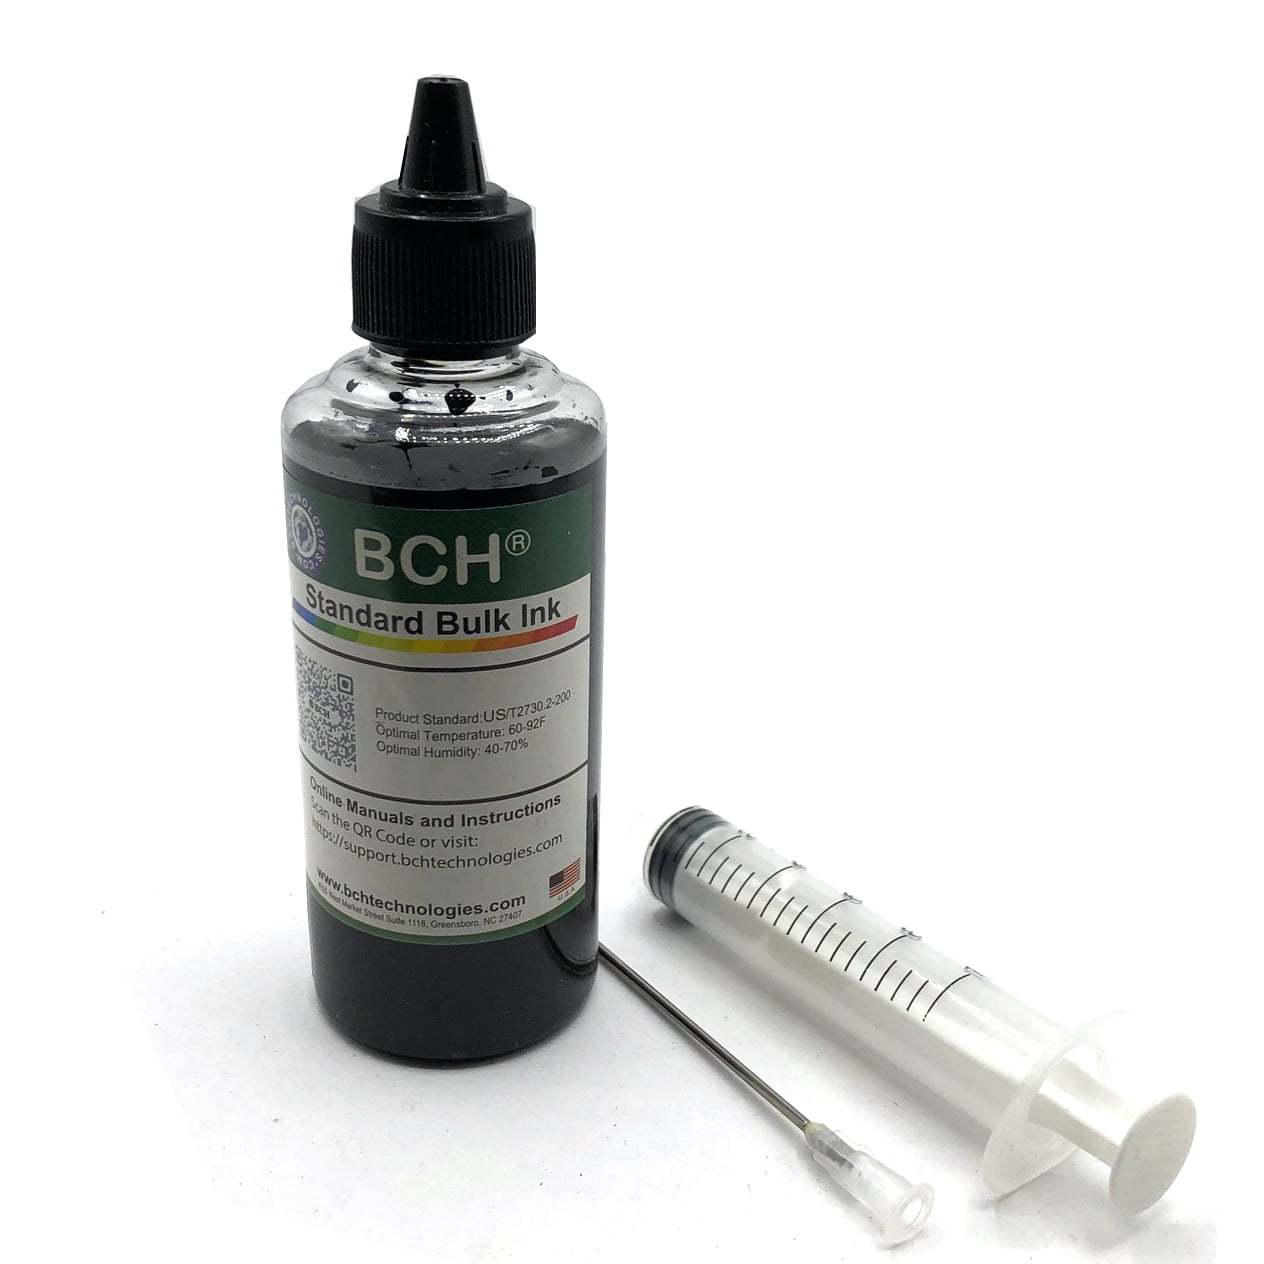 BCH All-Surface Fast Dry Black Stamp Ink Refill - Premium Grade for Non-Porous Surfaces, Such As Glass, Plastic, Metal, Vinyl, Acrylic, Leather - 1 oz